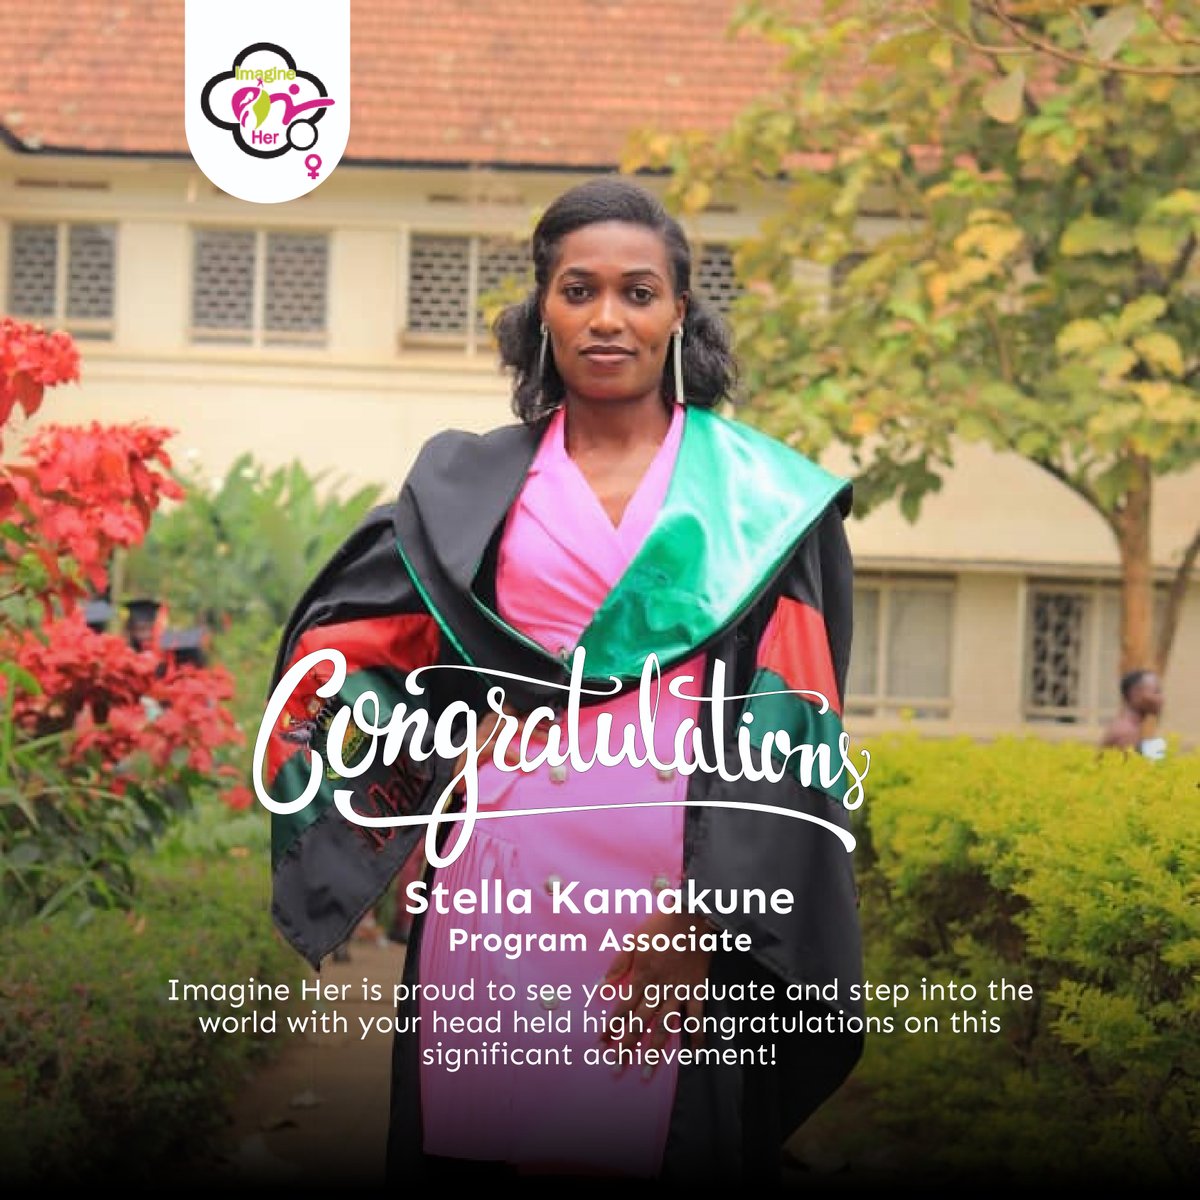 #Congrats to our Program Associate, Stella Kamakune, who just graduated with a Bachelor's Degree of Science in Agriculture from #MakerereUniversity! We're proud of her achievement and excited to see all the amazing things she'll accomplish in the future! #Imagineher